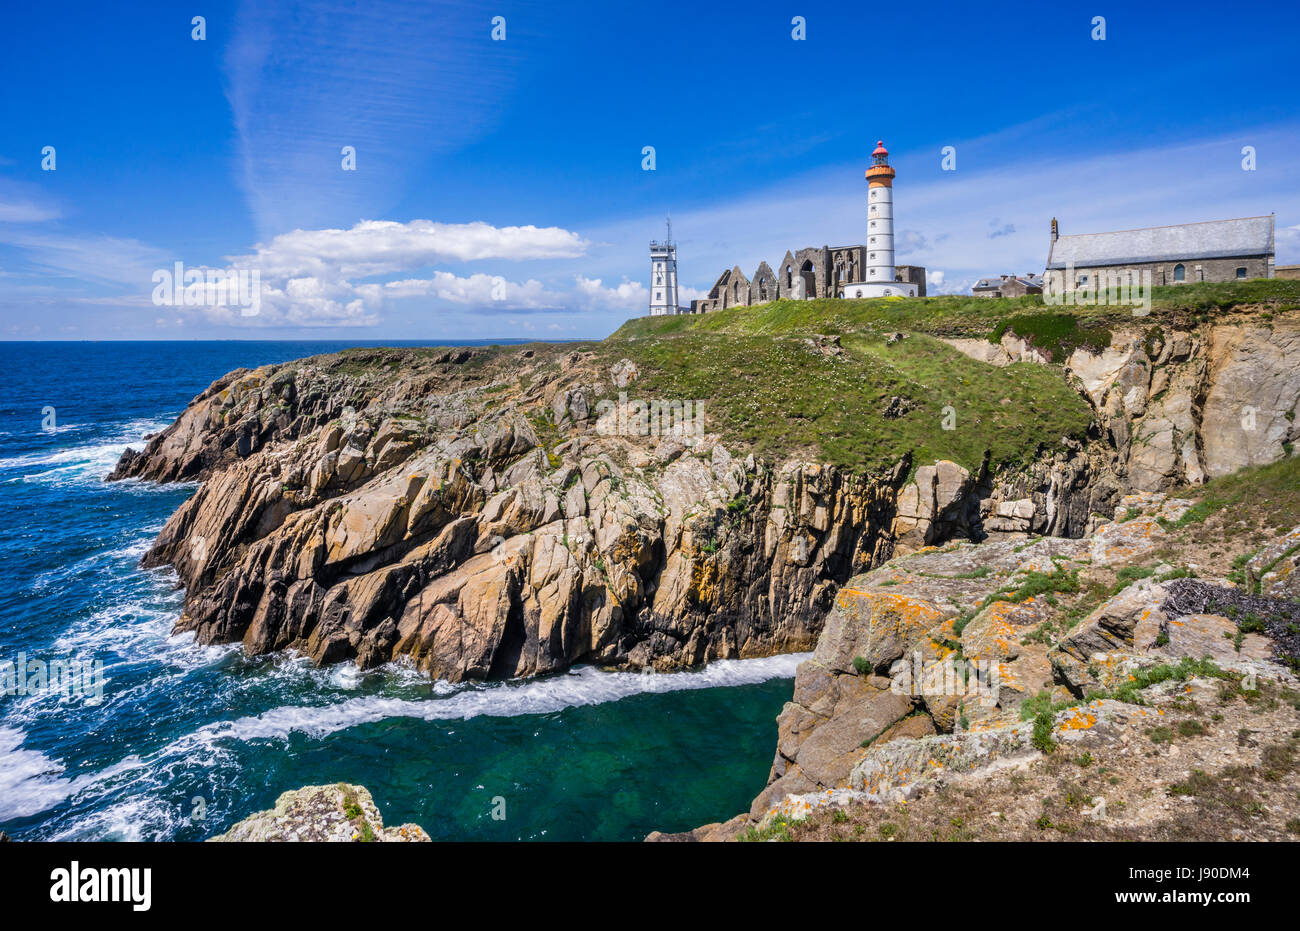 France, Brittany, Finistére department, Pointe Sant-Mathieu, view of the sémaphore signal station, the ruins of Saint Maur monastery and Saint-Mathieu Stock Photo